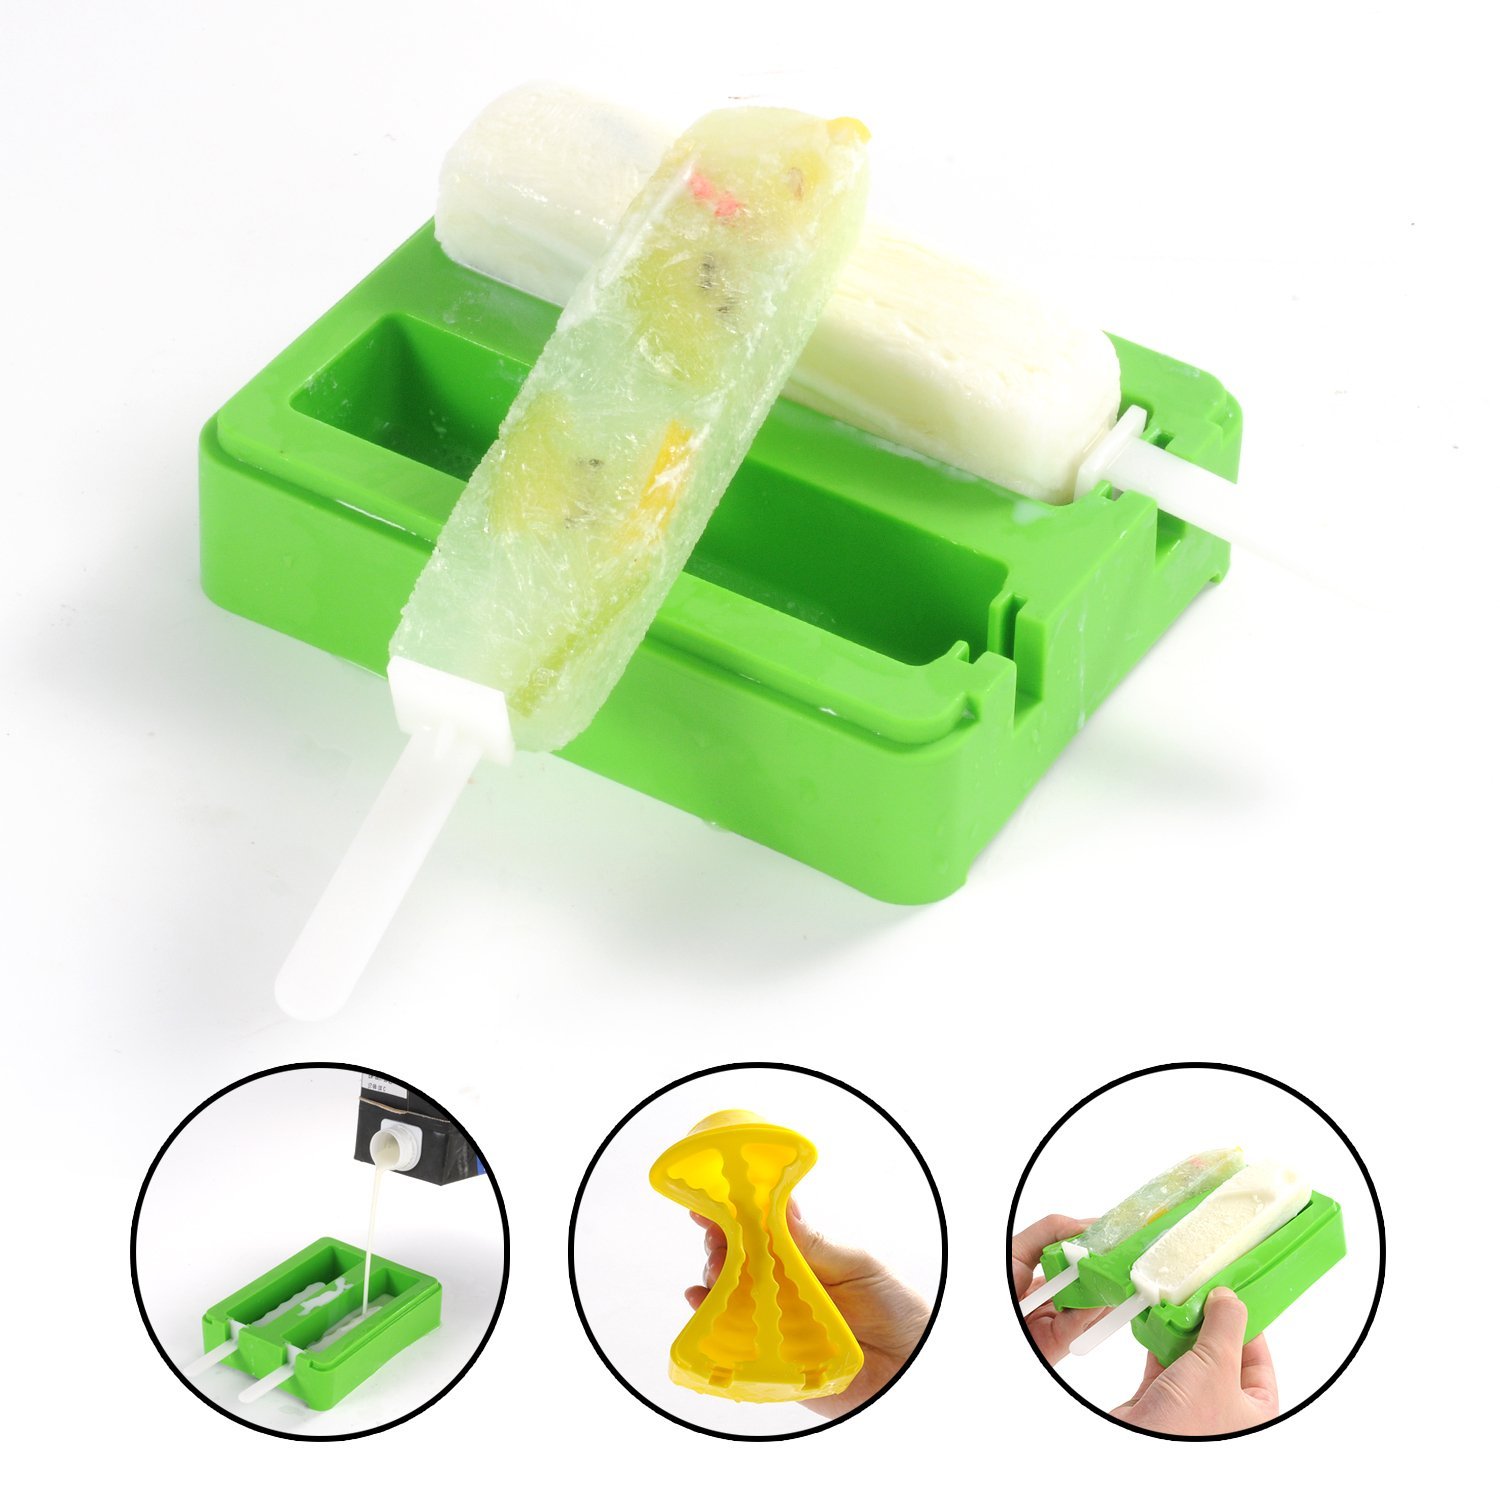 BPA Free Silicone Popsicle Molds, Silicone Popsicle Maker Ice Pop Molds with Lids